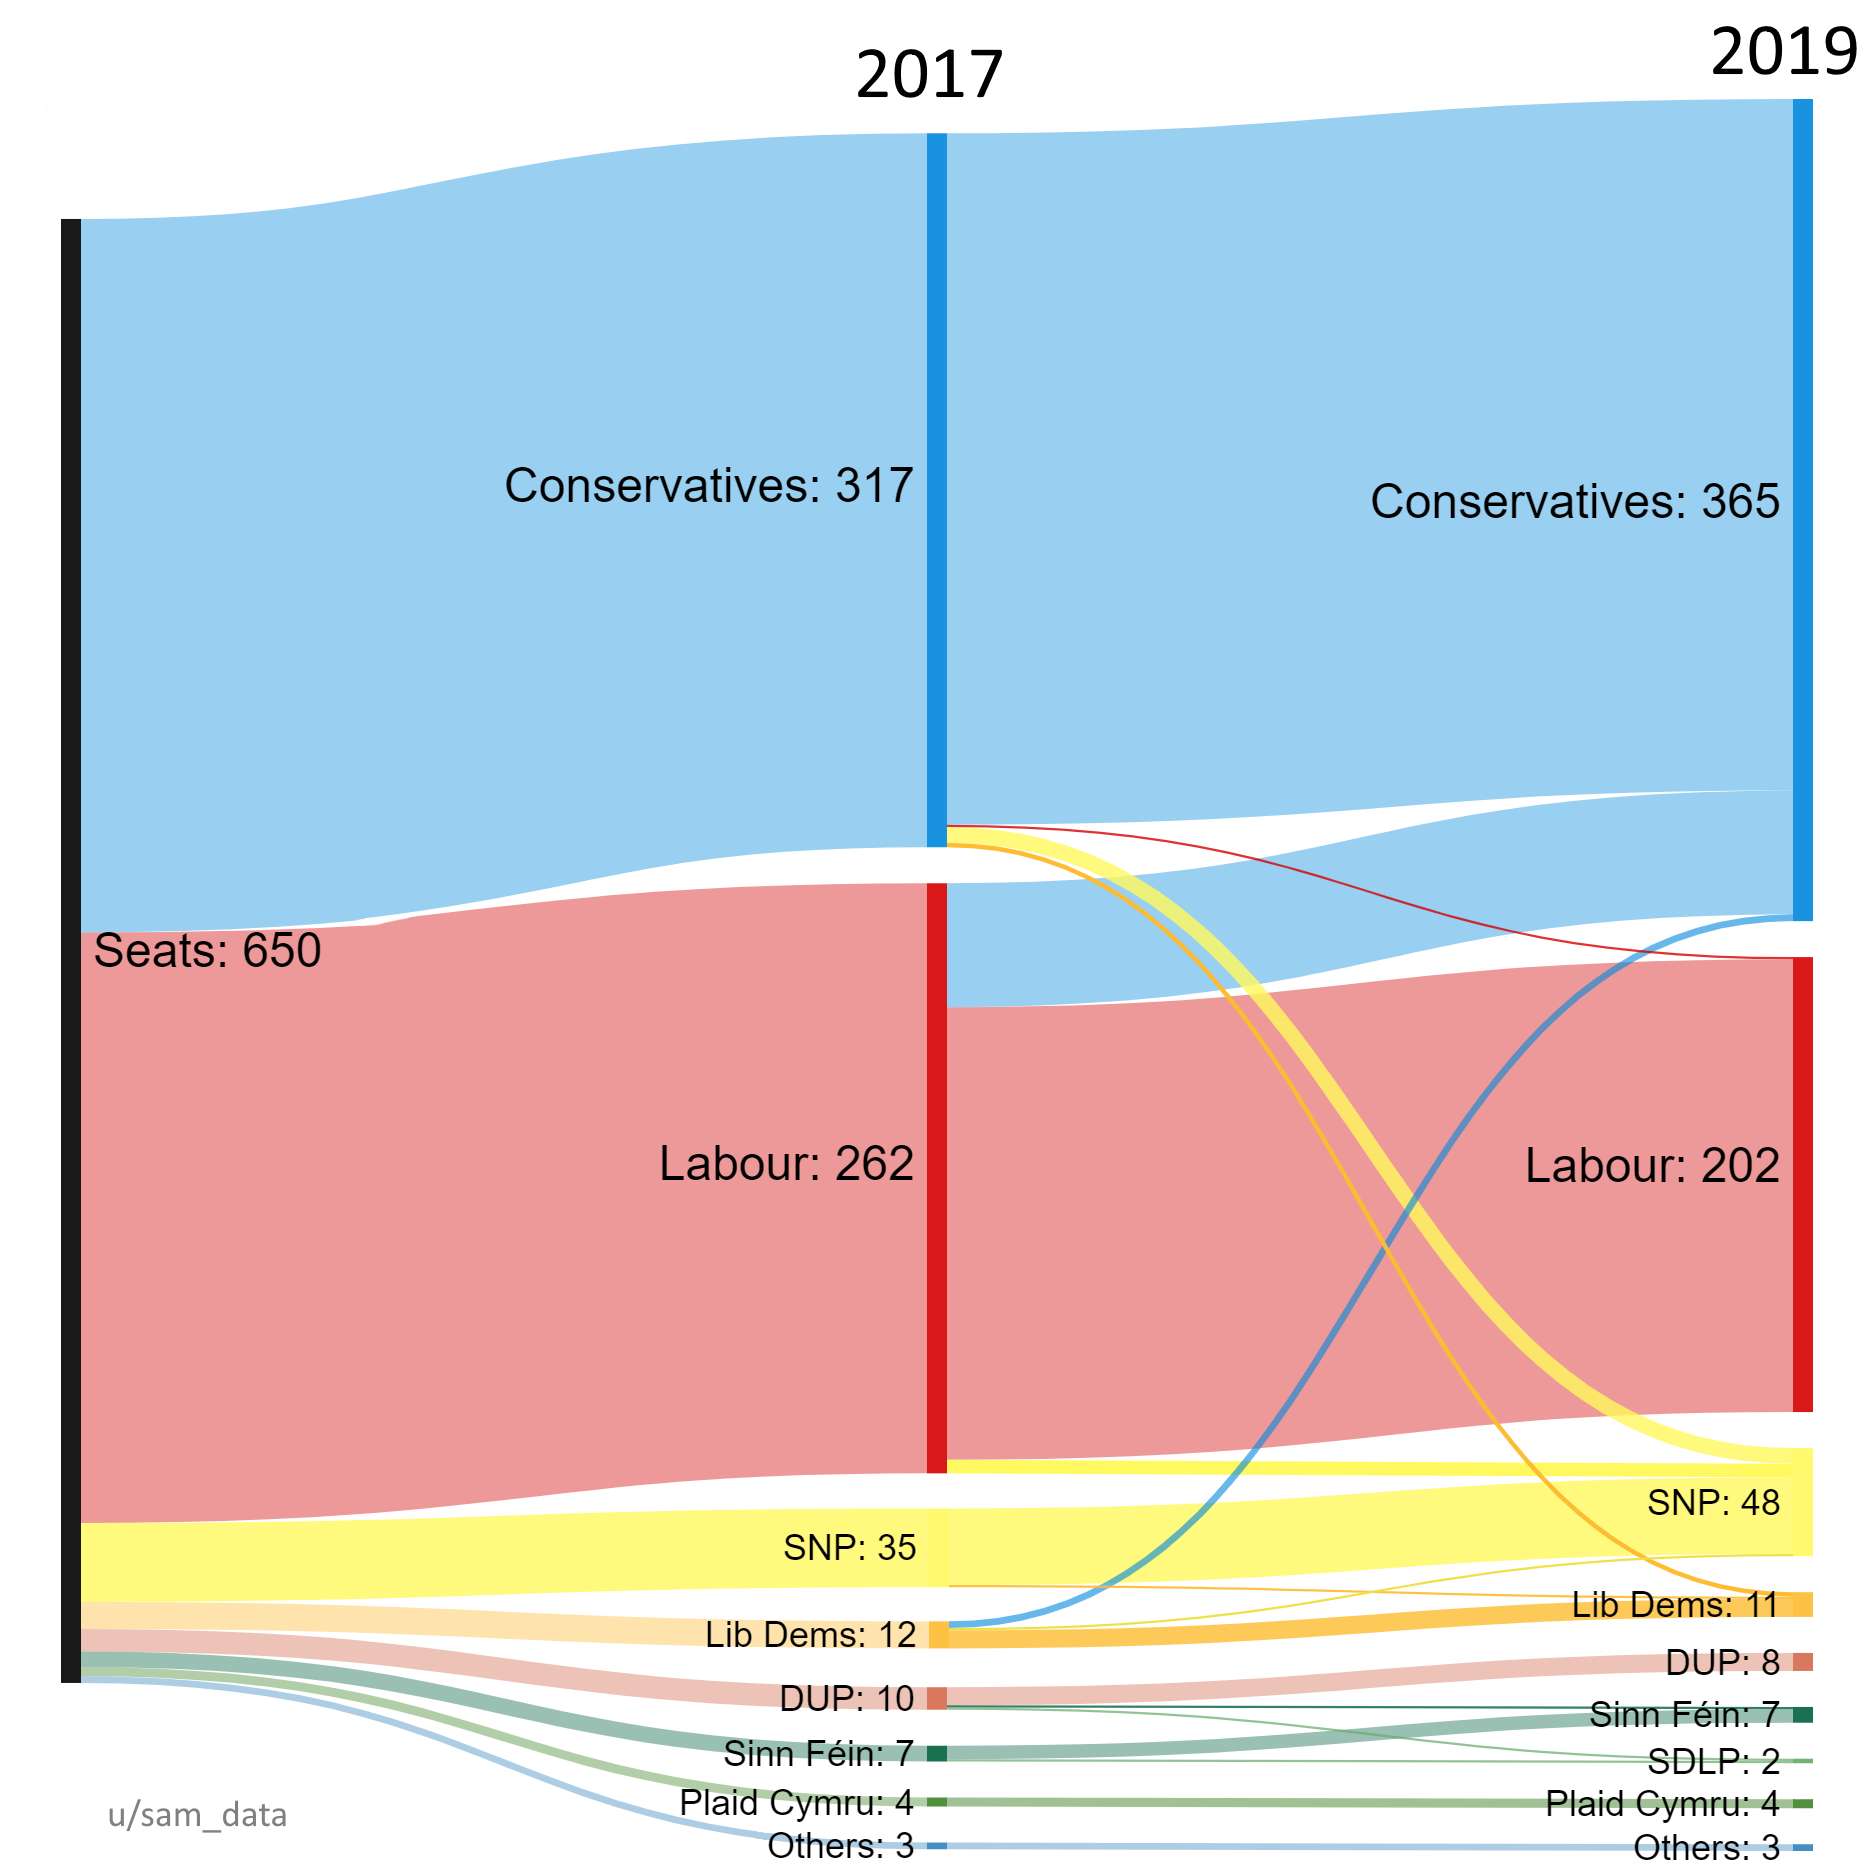 image showing [OC] How the UK Parliament seats changed from the 2017 Election to the 2019 Election